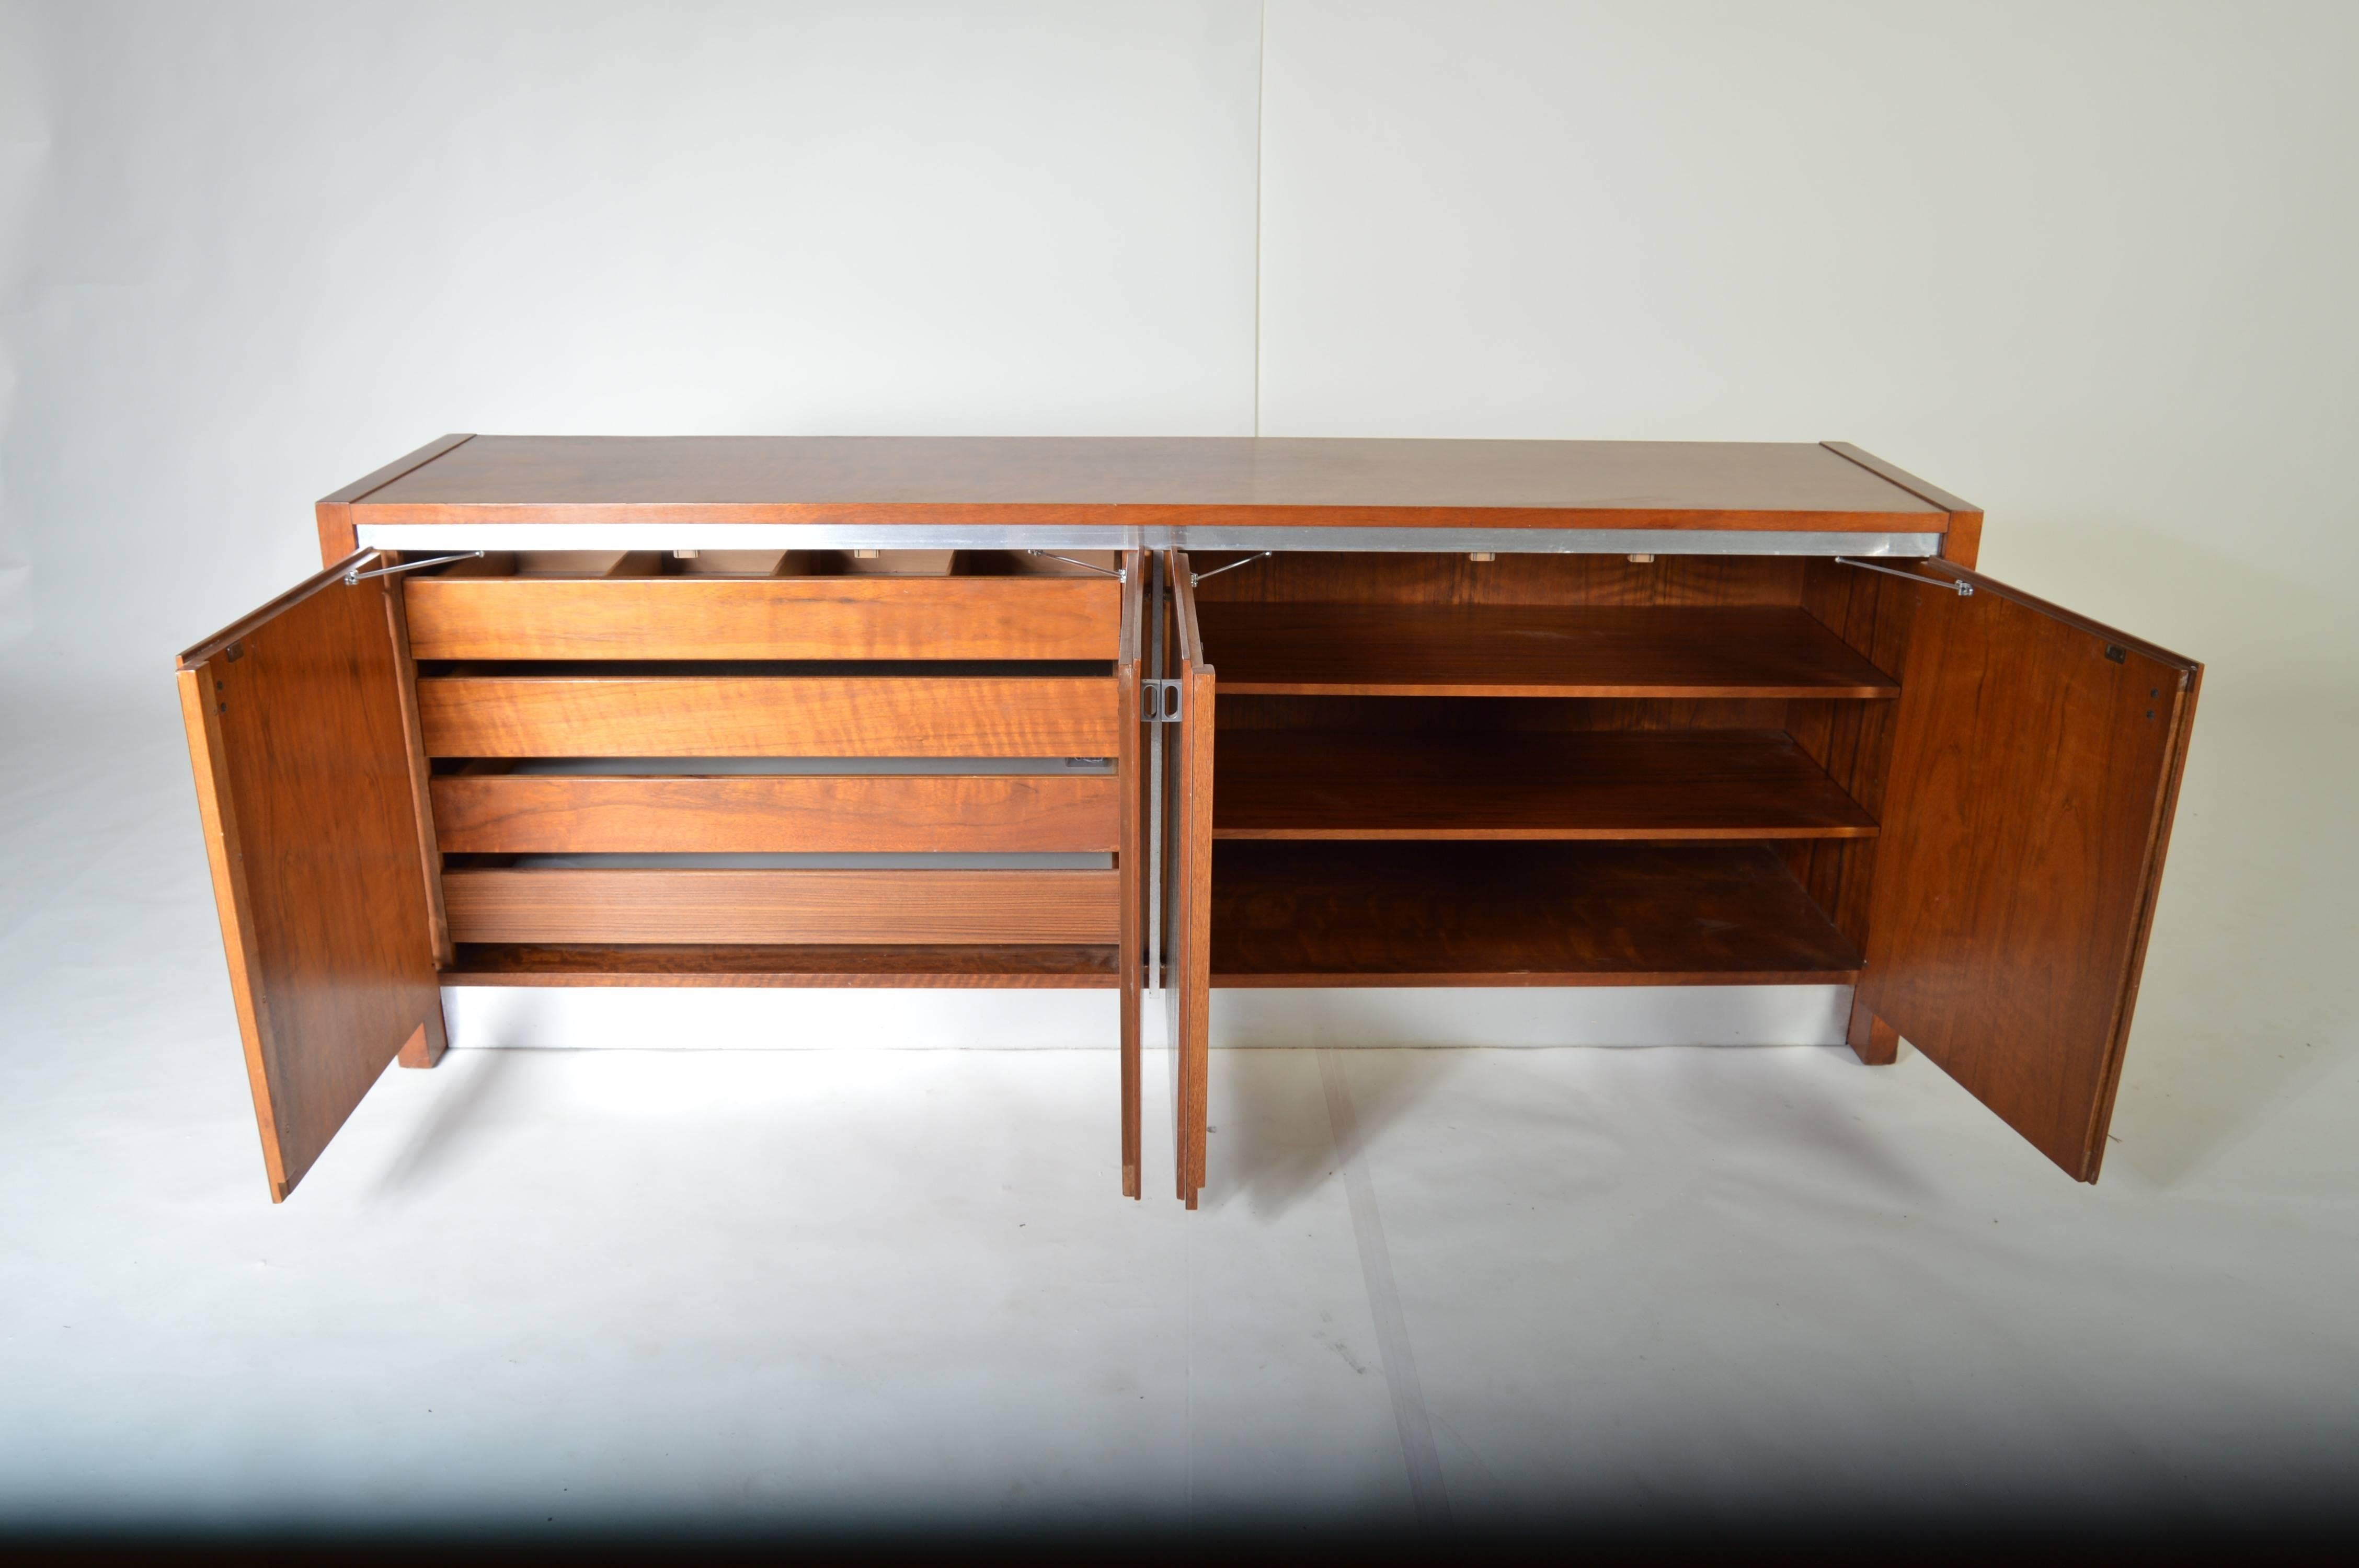 A walnut sideboard attributed to Milo Baughman by Founders having aluminum trim throughout the front and spring resisted doors. Ample storage space.